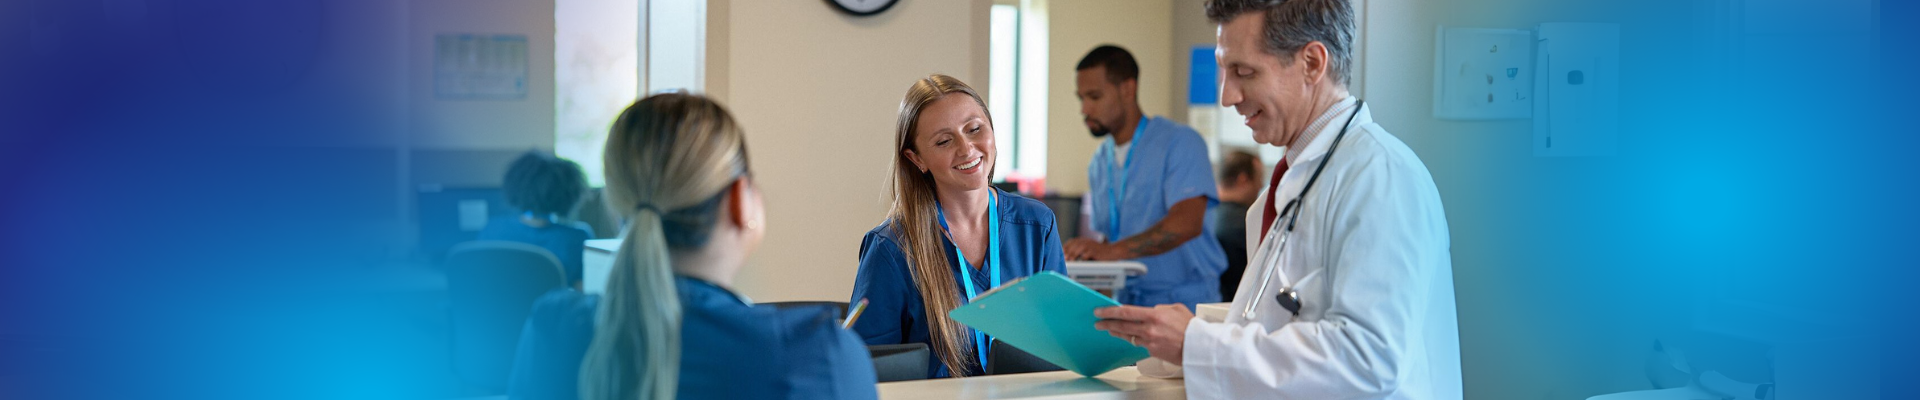 10 Tips for Fitting In and Thriving with Established Staff on Contract Nursing Assignments 